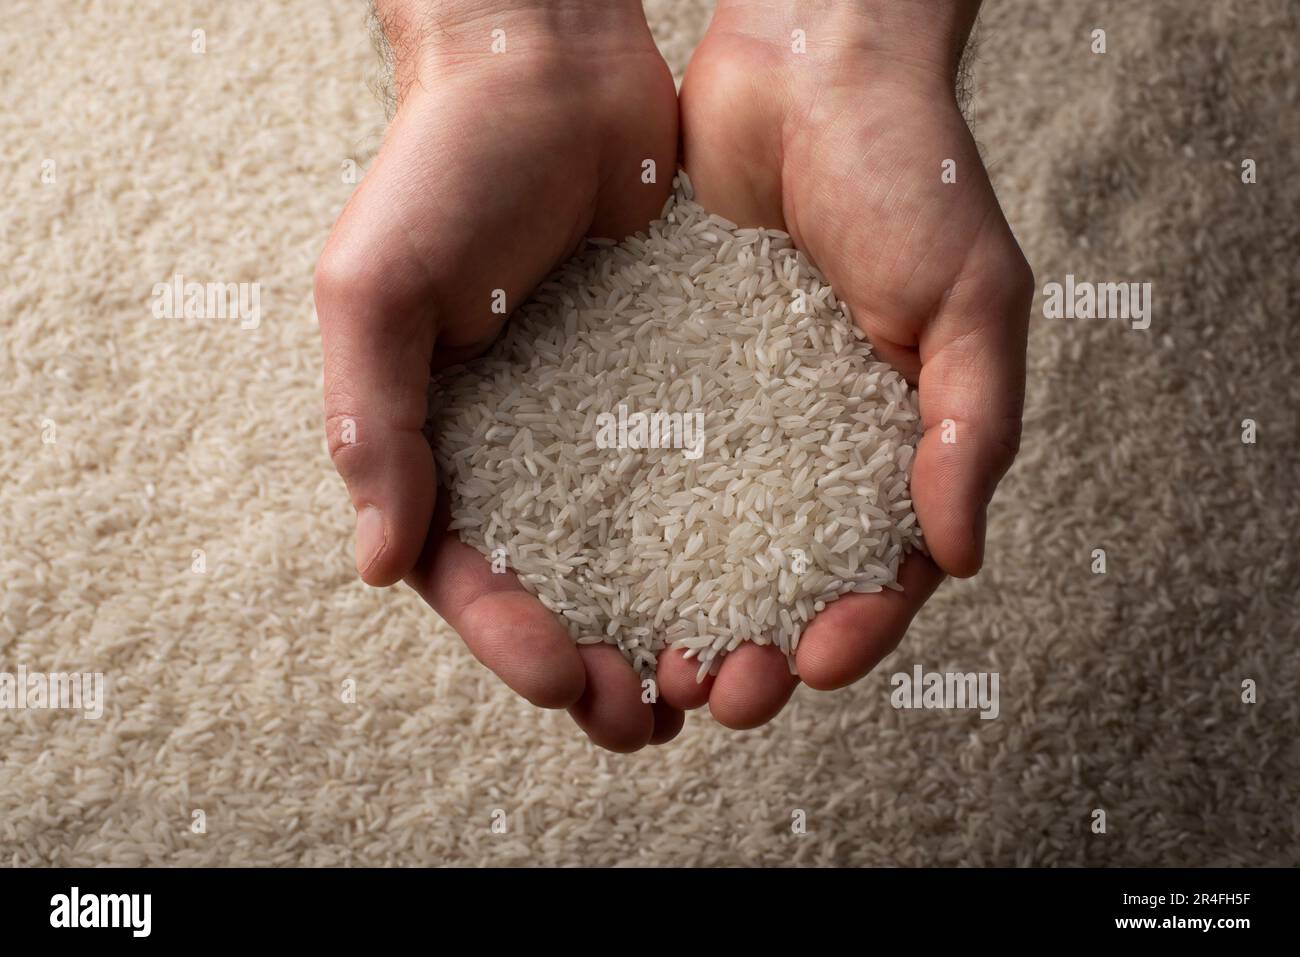 Human hands holding handful of rice plain rice background Stock Photo